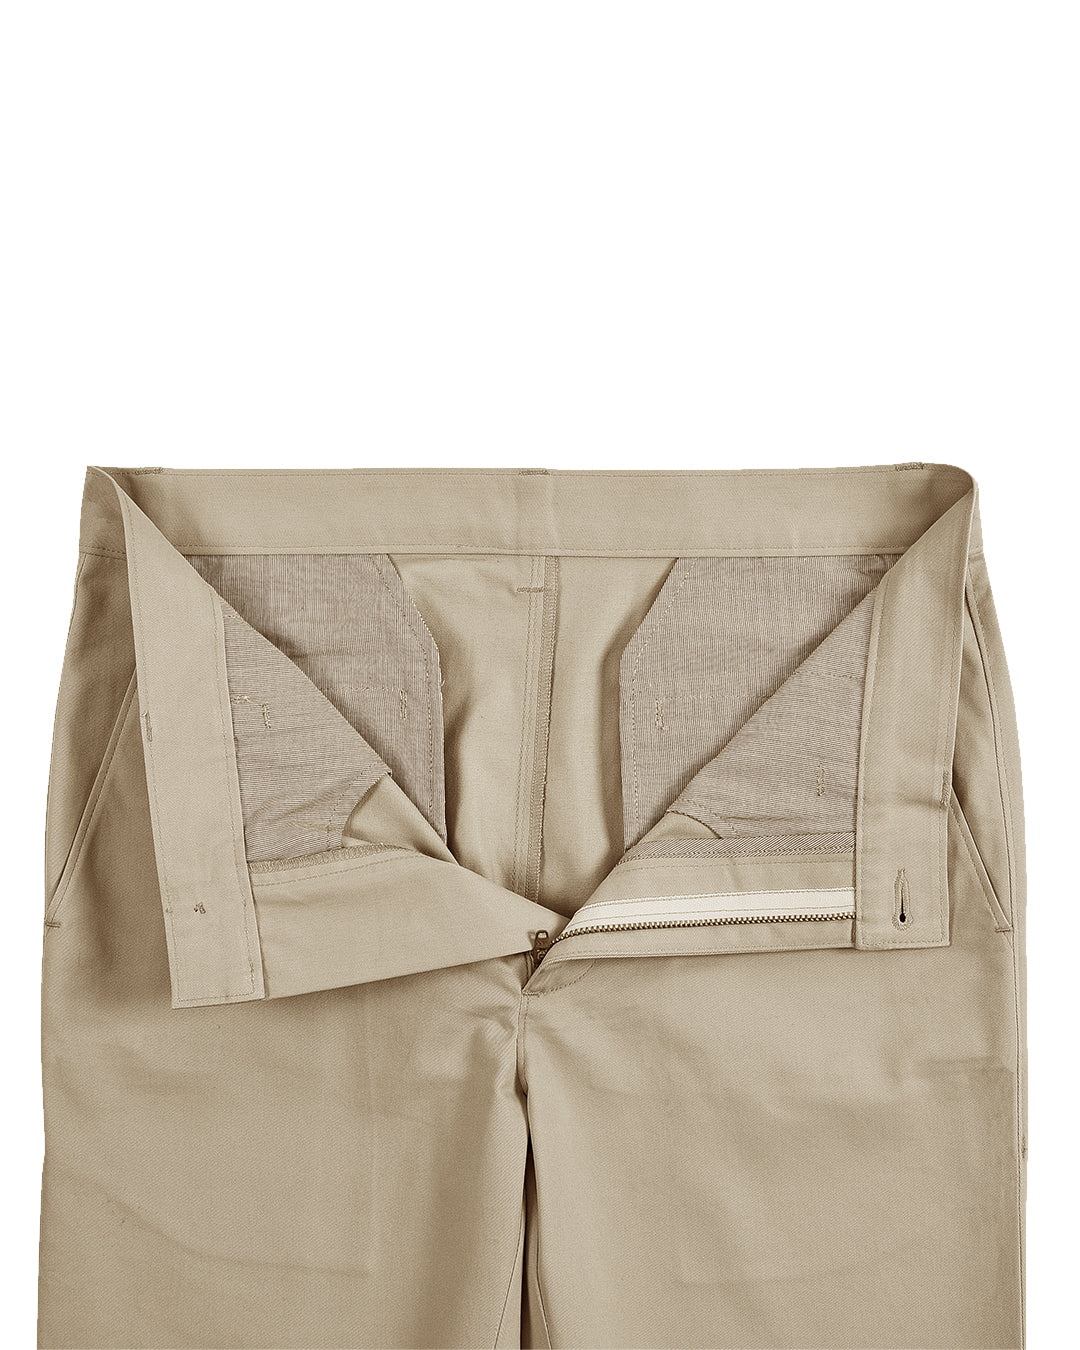 Open front view of custom Genoa Chino pants for men by Luxire in British khaki